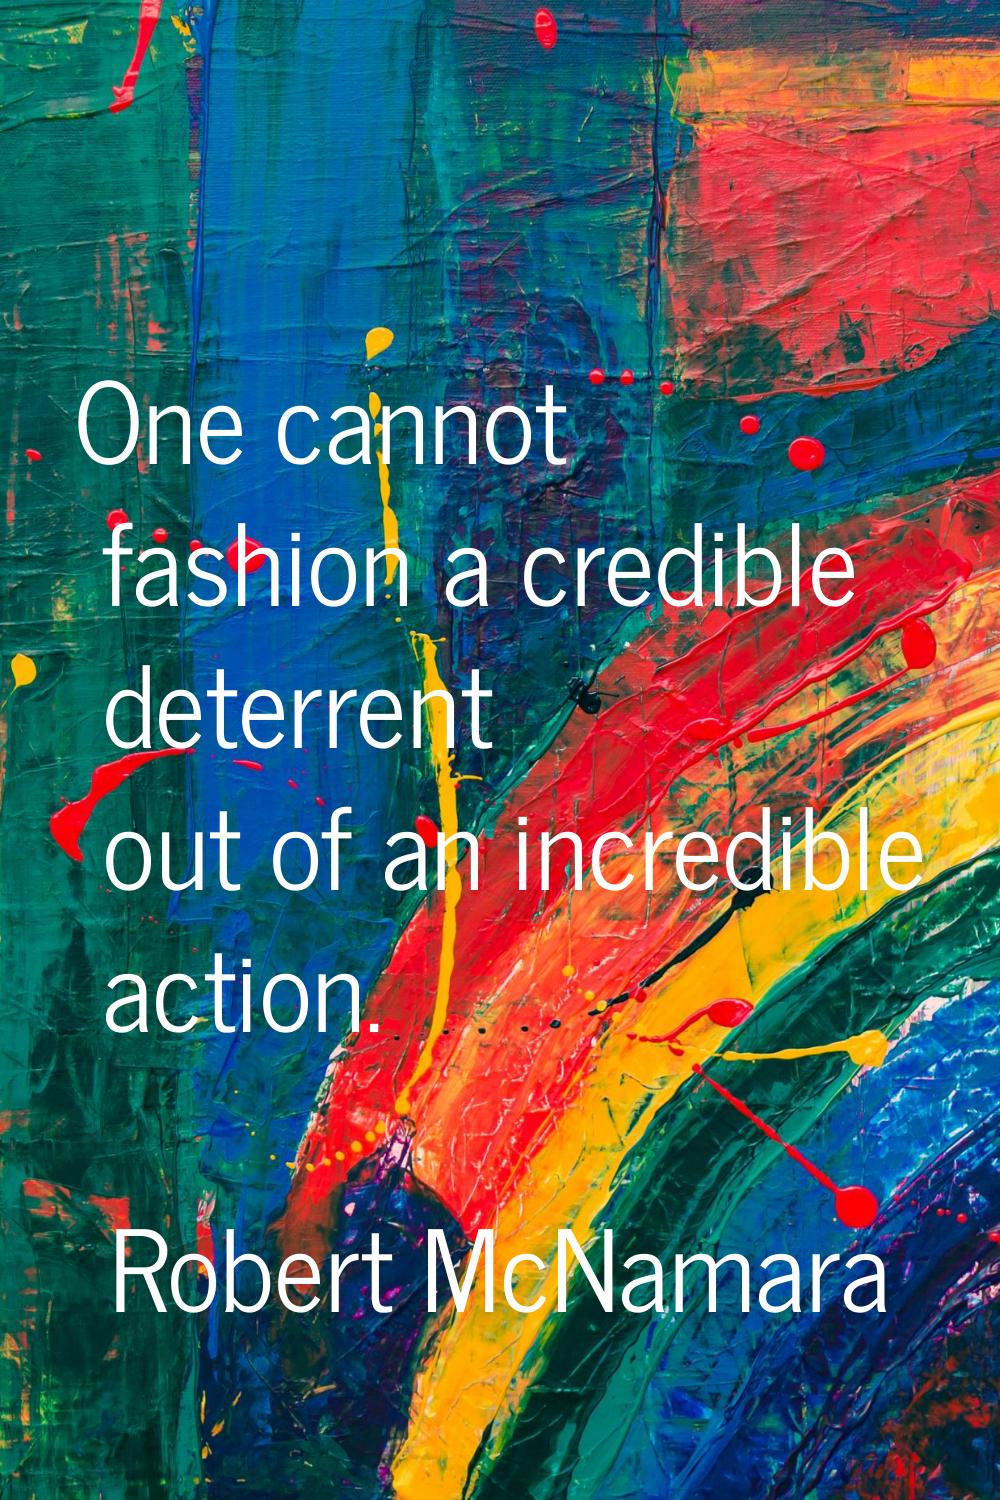 One cannot fashion a credible deterrent out of an incredible action.